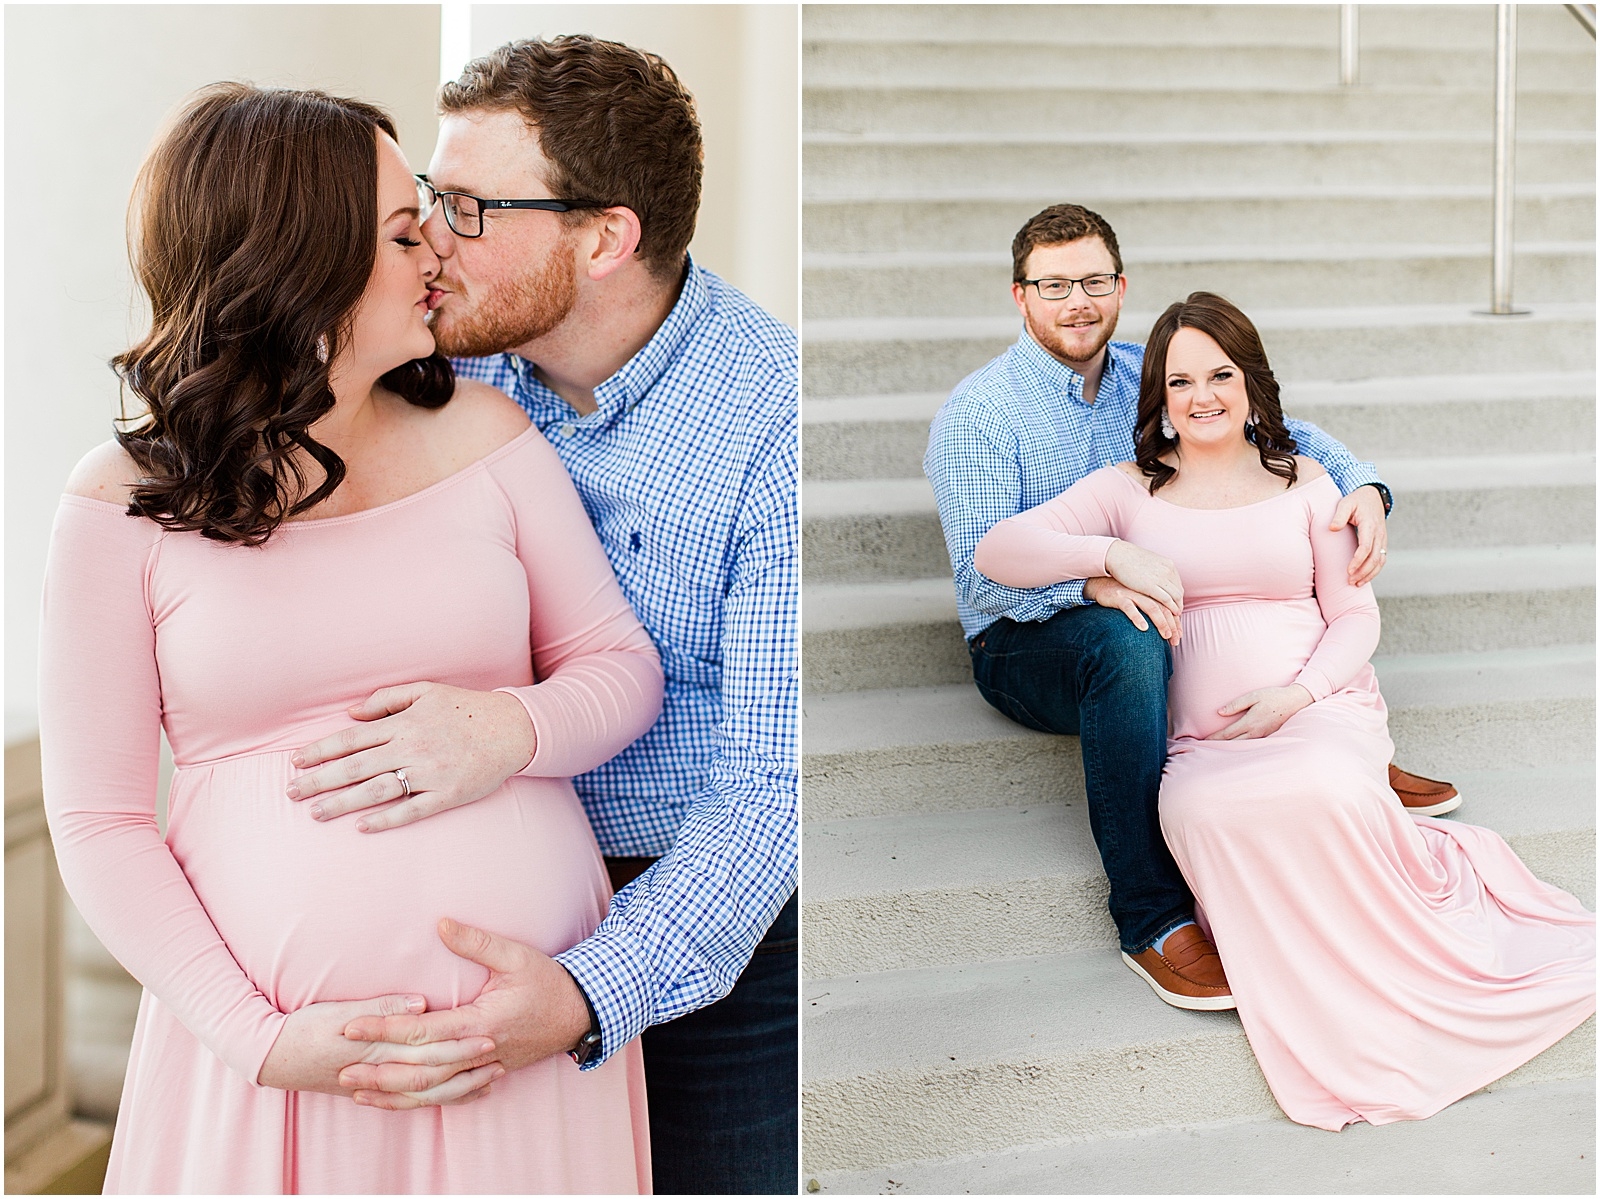 A Downtown Owensboro Maternity Session | Kayla and Grant Evansville Indiana Wedding Photographers-0017.jpg